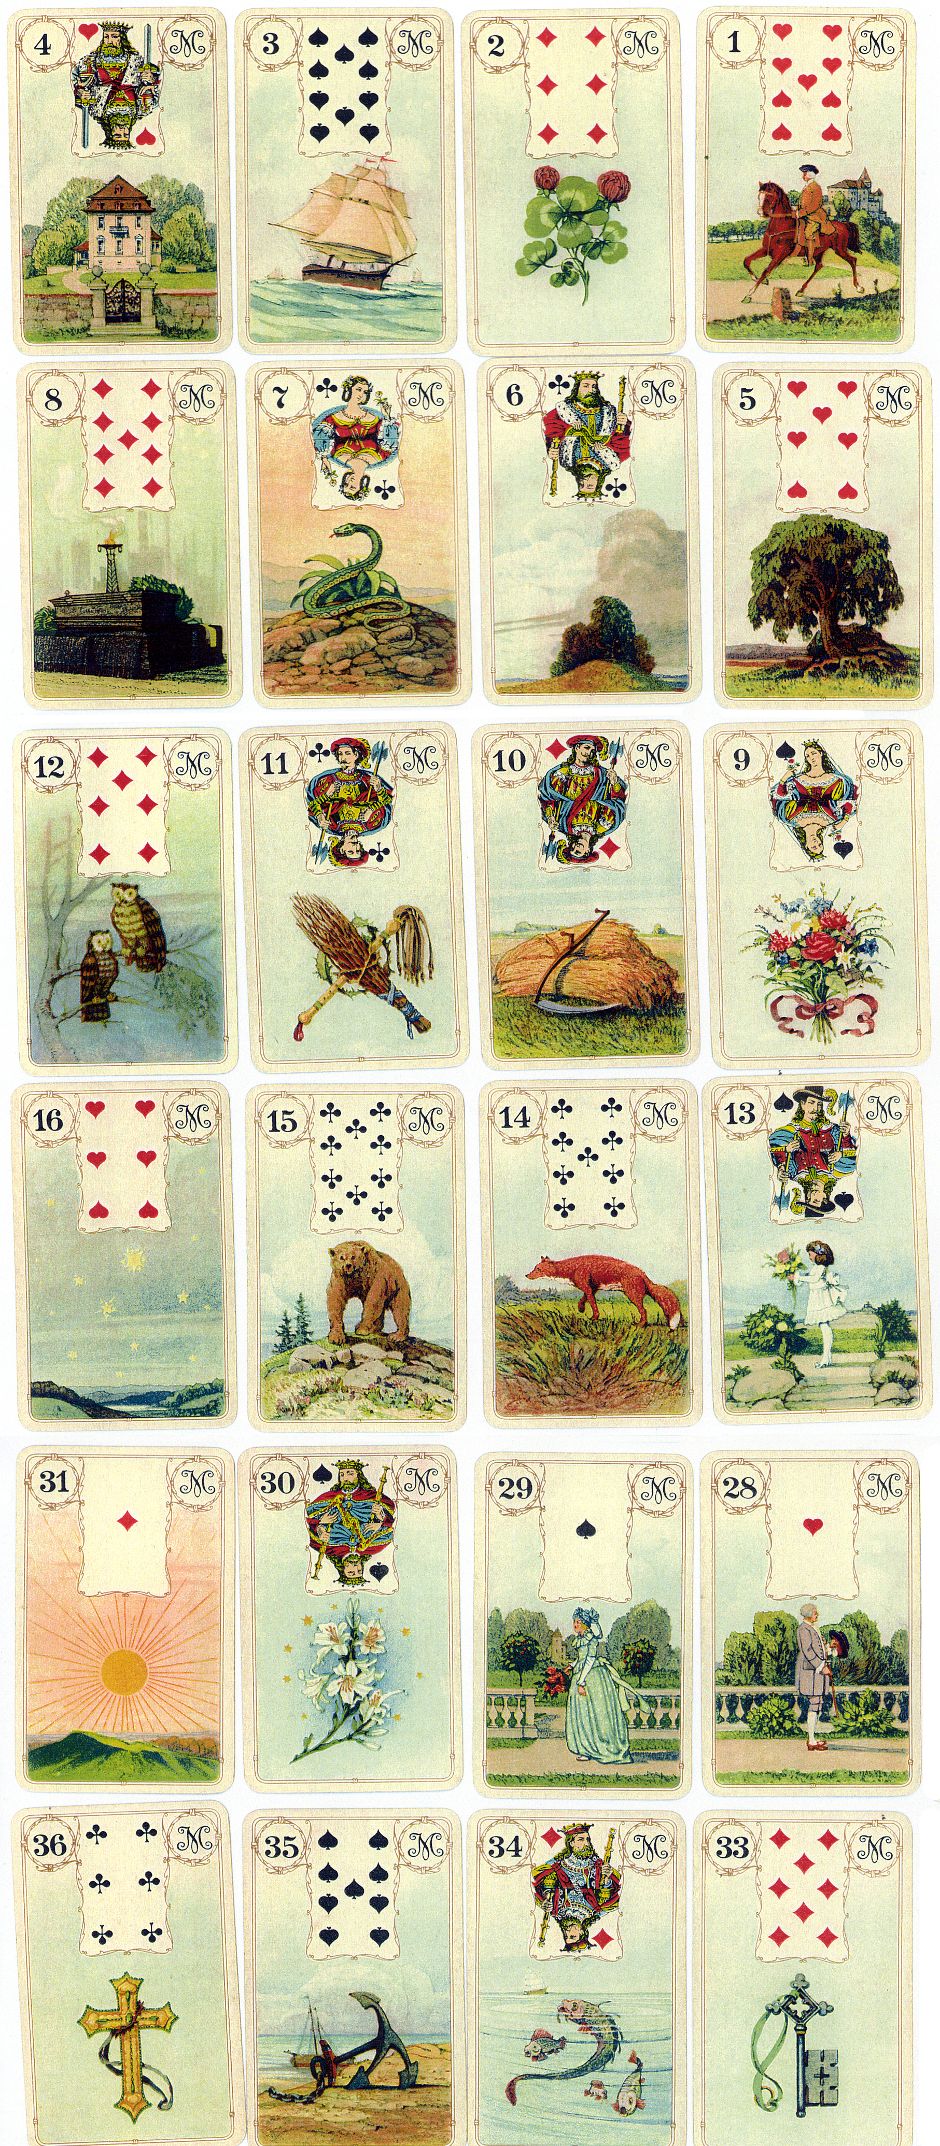 Madame Lenormand Fortune Telling Cards made by J. Müller